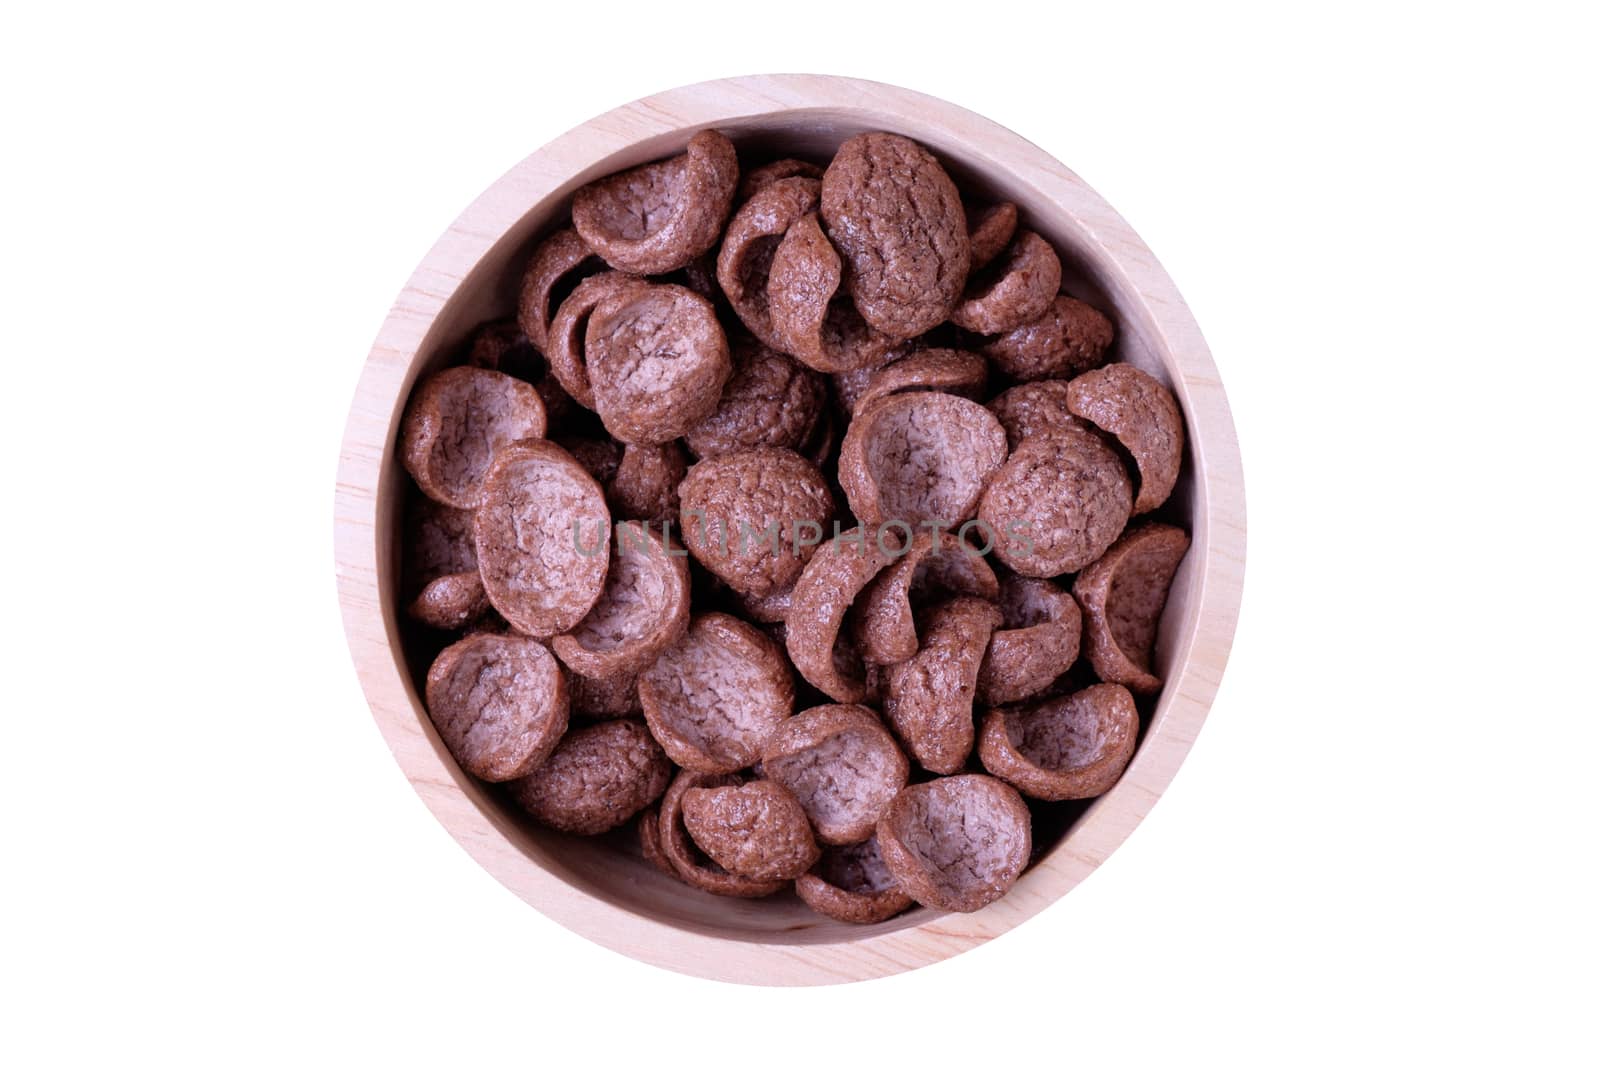 choco cereal in wooden bowl, isolate white background.